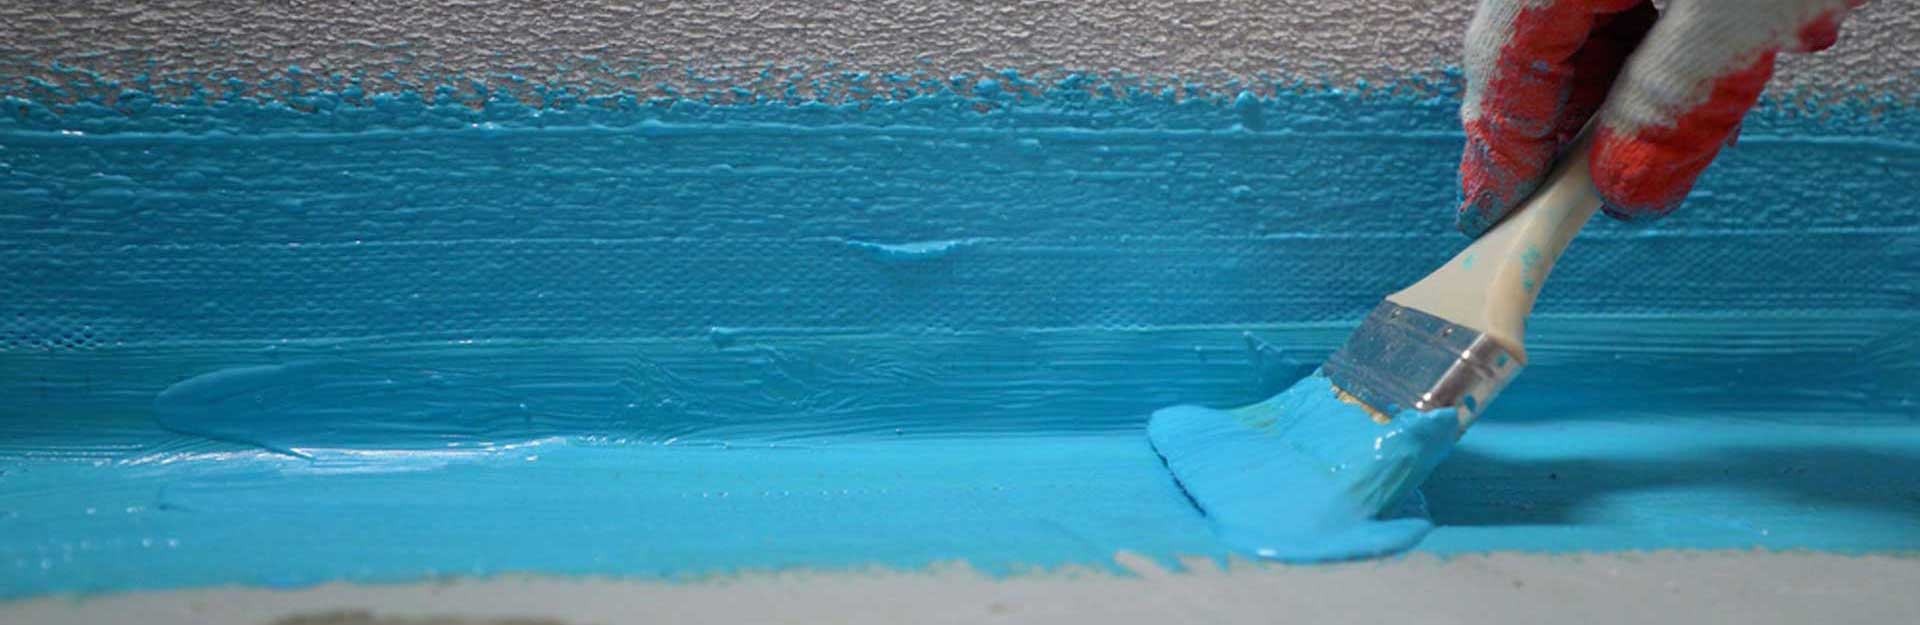 Impress Tiling and Waterproofing